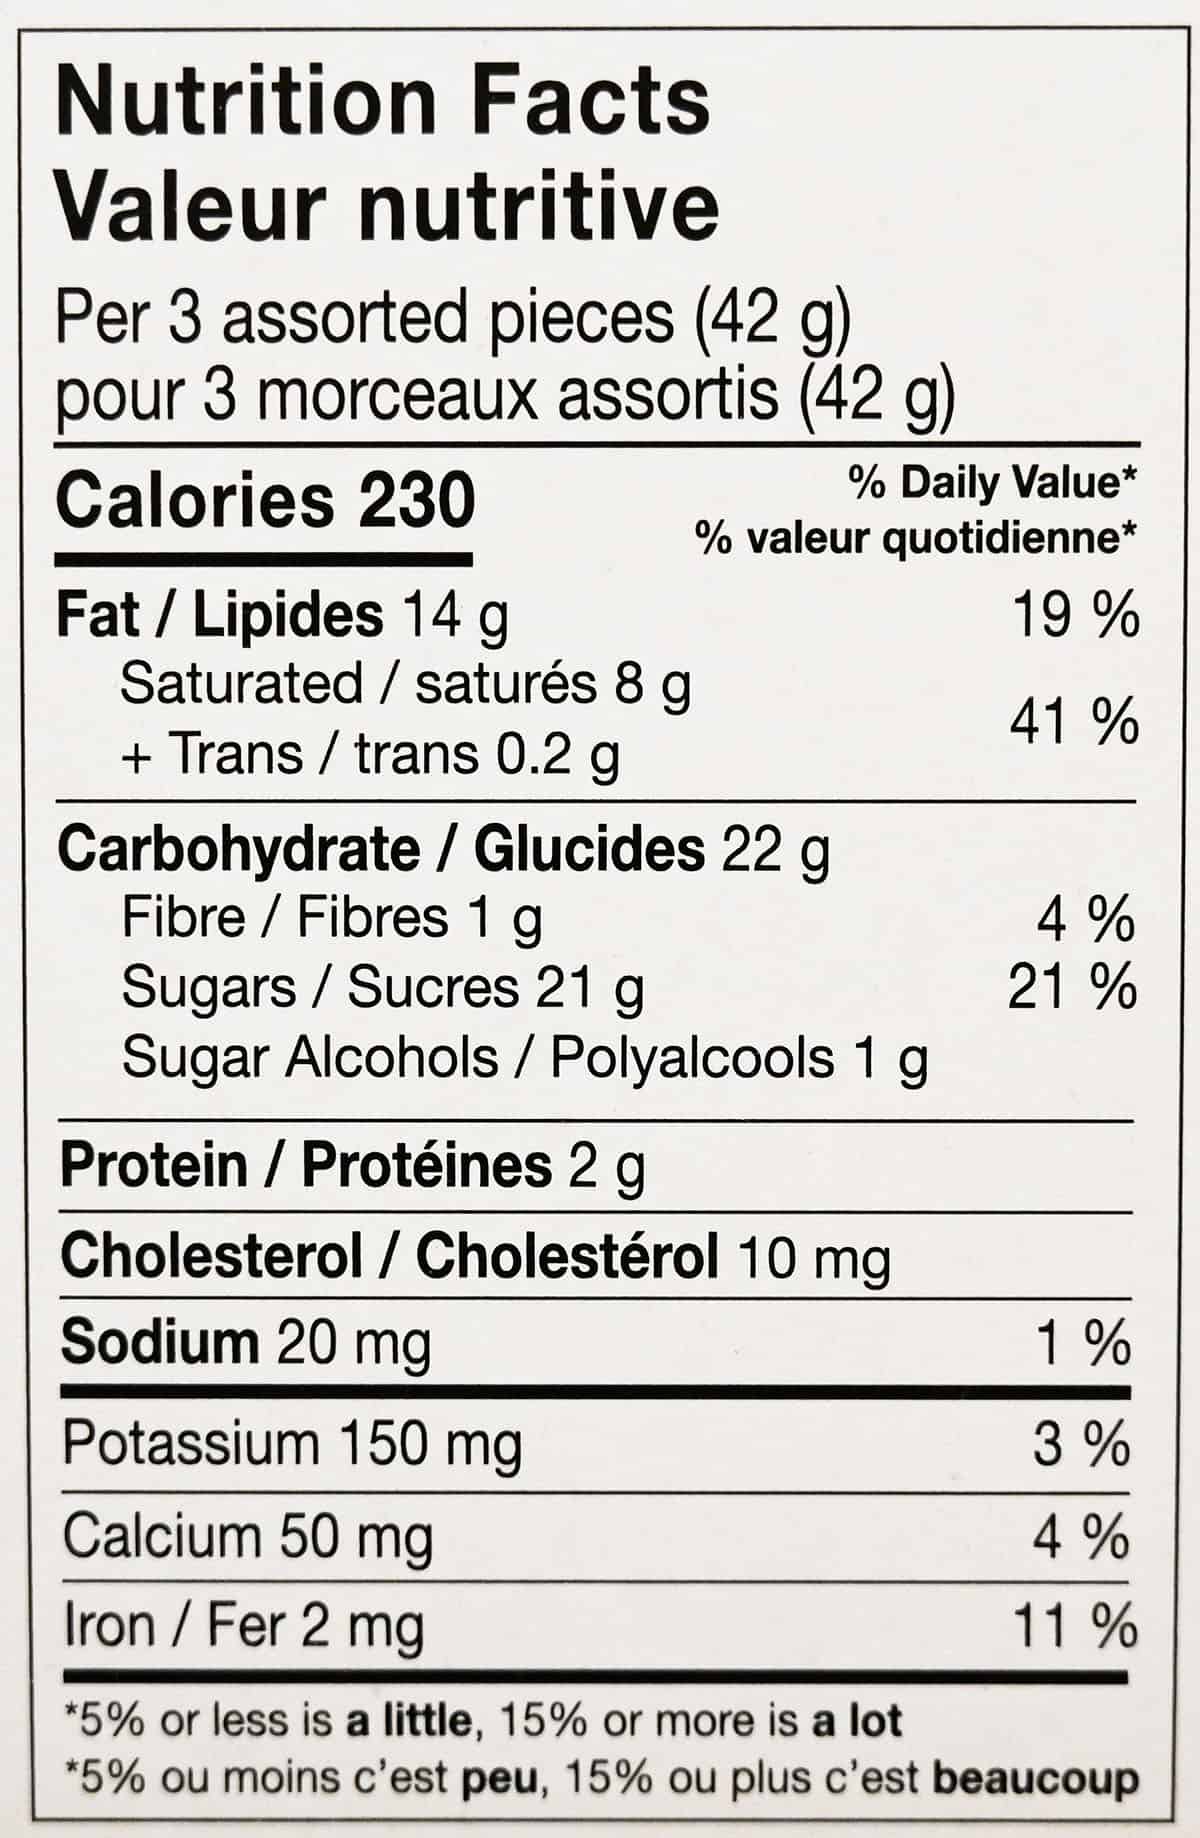 Image of the chocolates nutrition facts from the package.